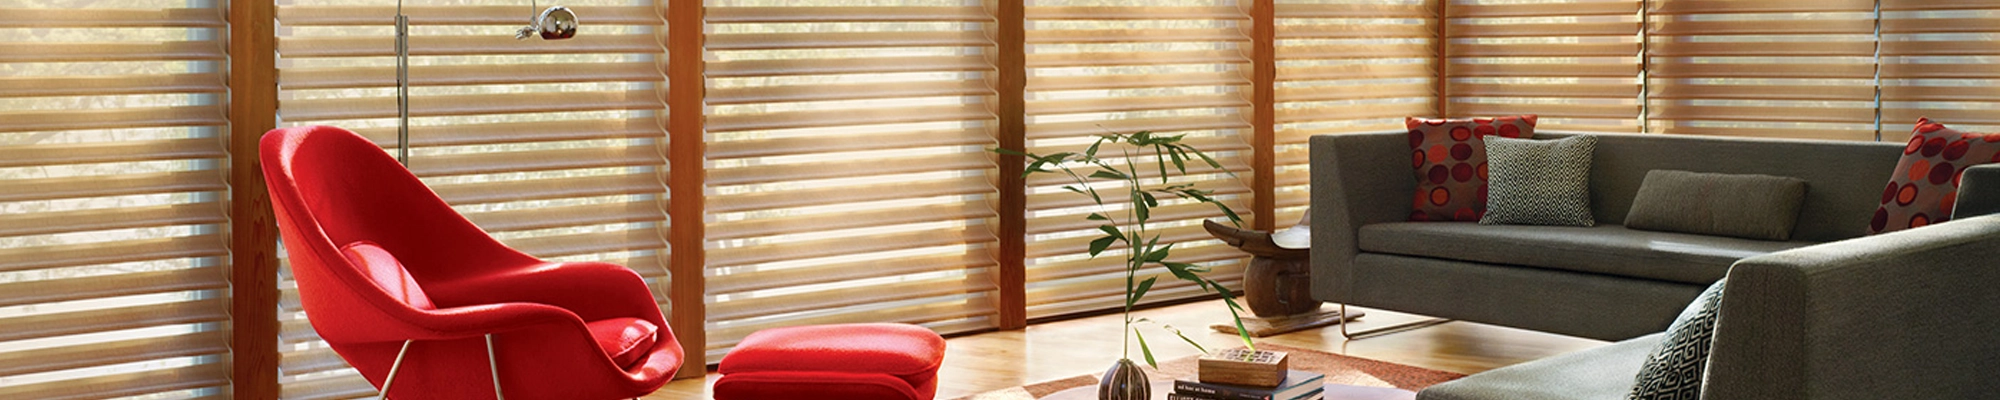 Window treatments provided by CarpetsPlus by Design